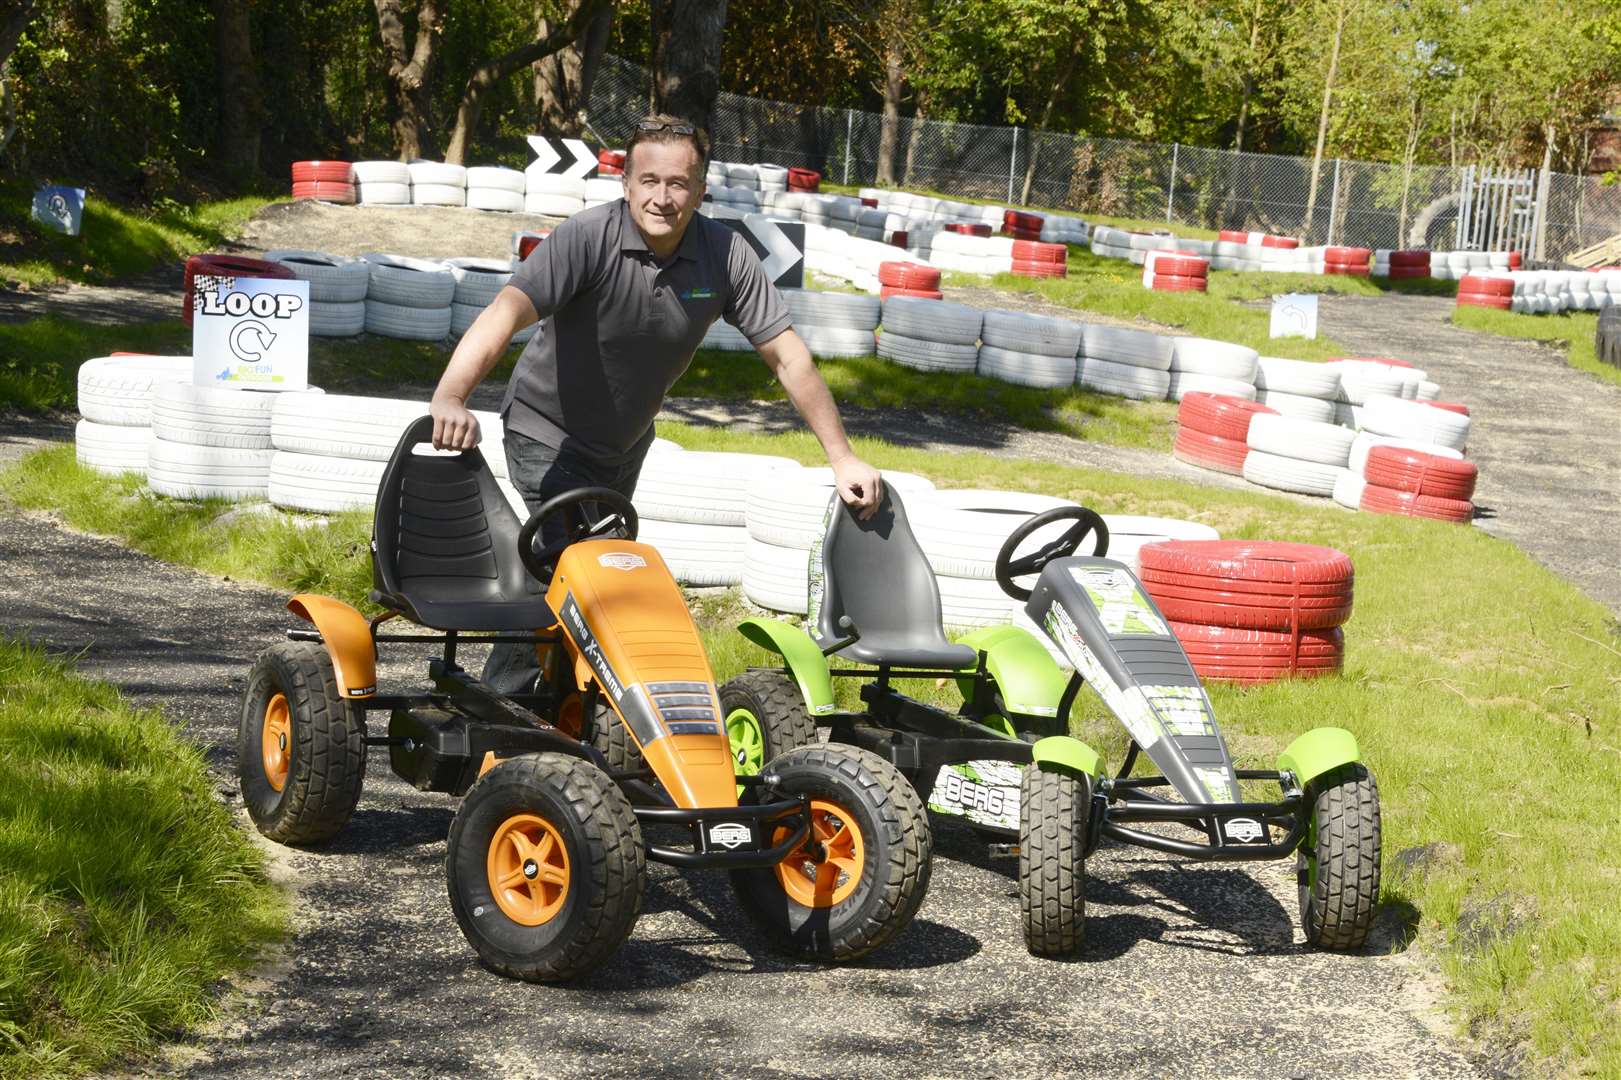 Big Fun House owner Simon Bridgland at the centre's go-kart track which launched last May